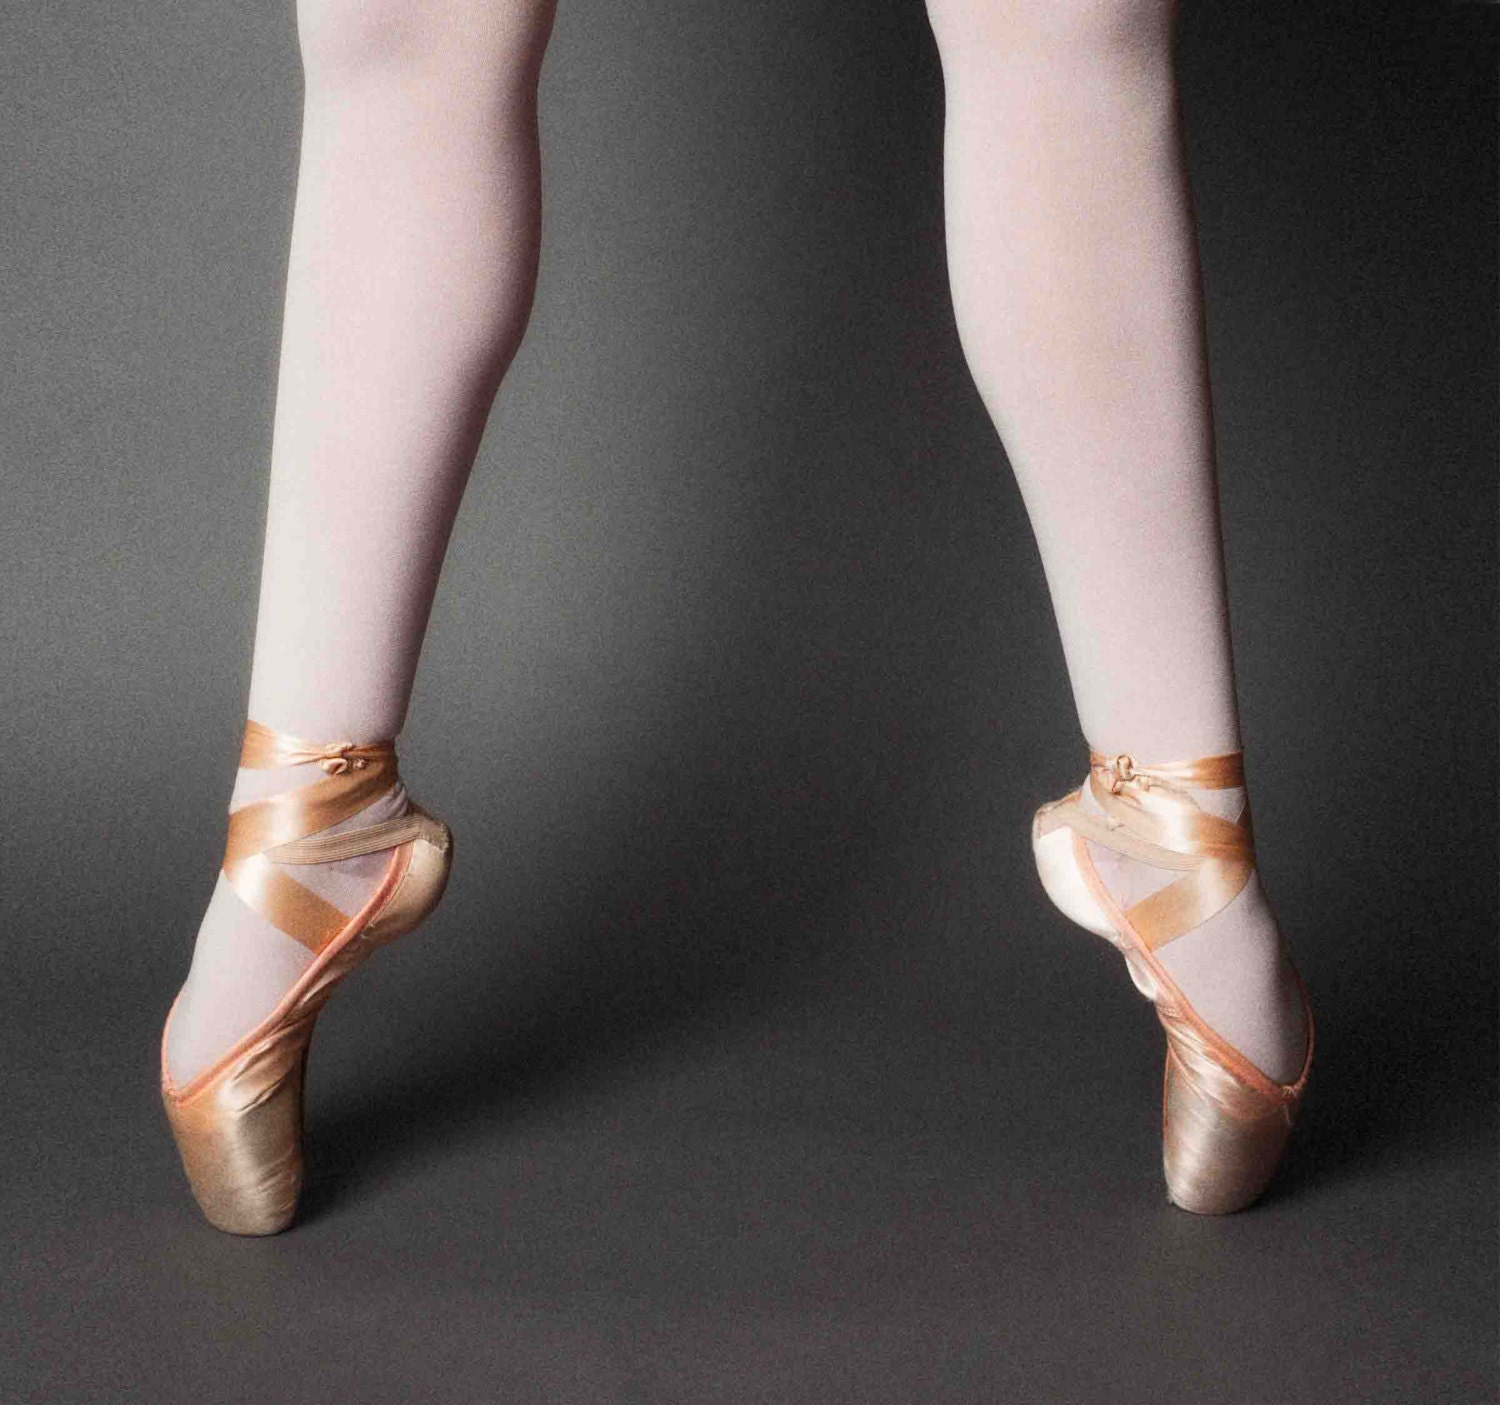 Ballet Pointe Shoes Backround